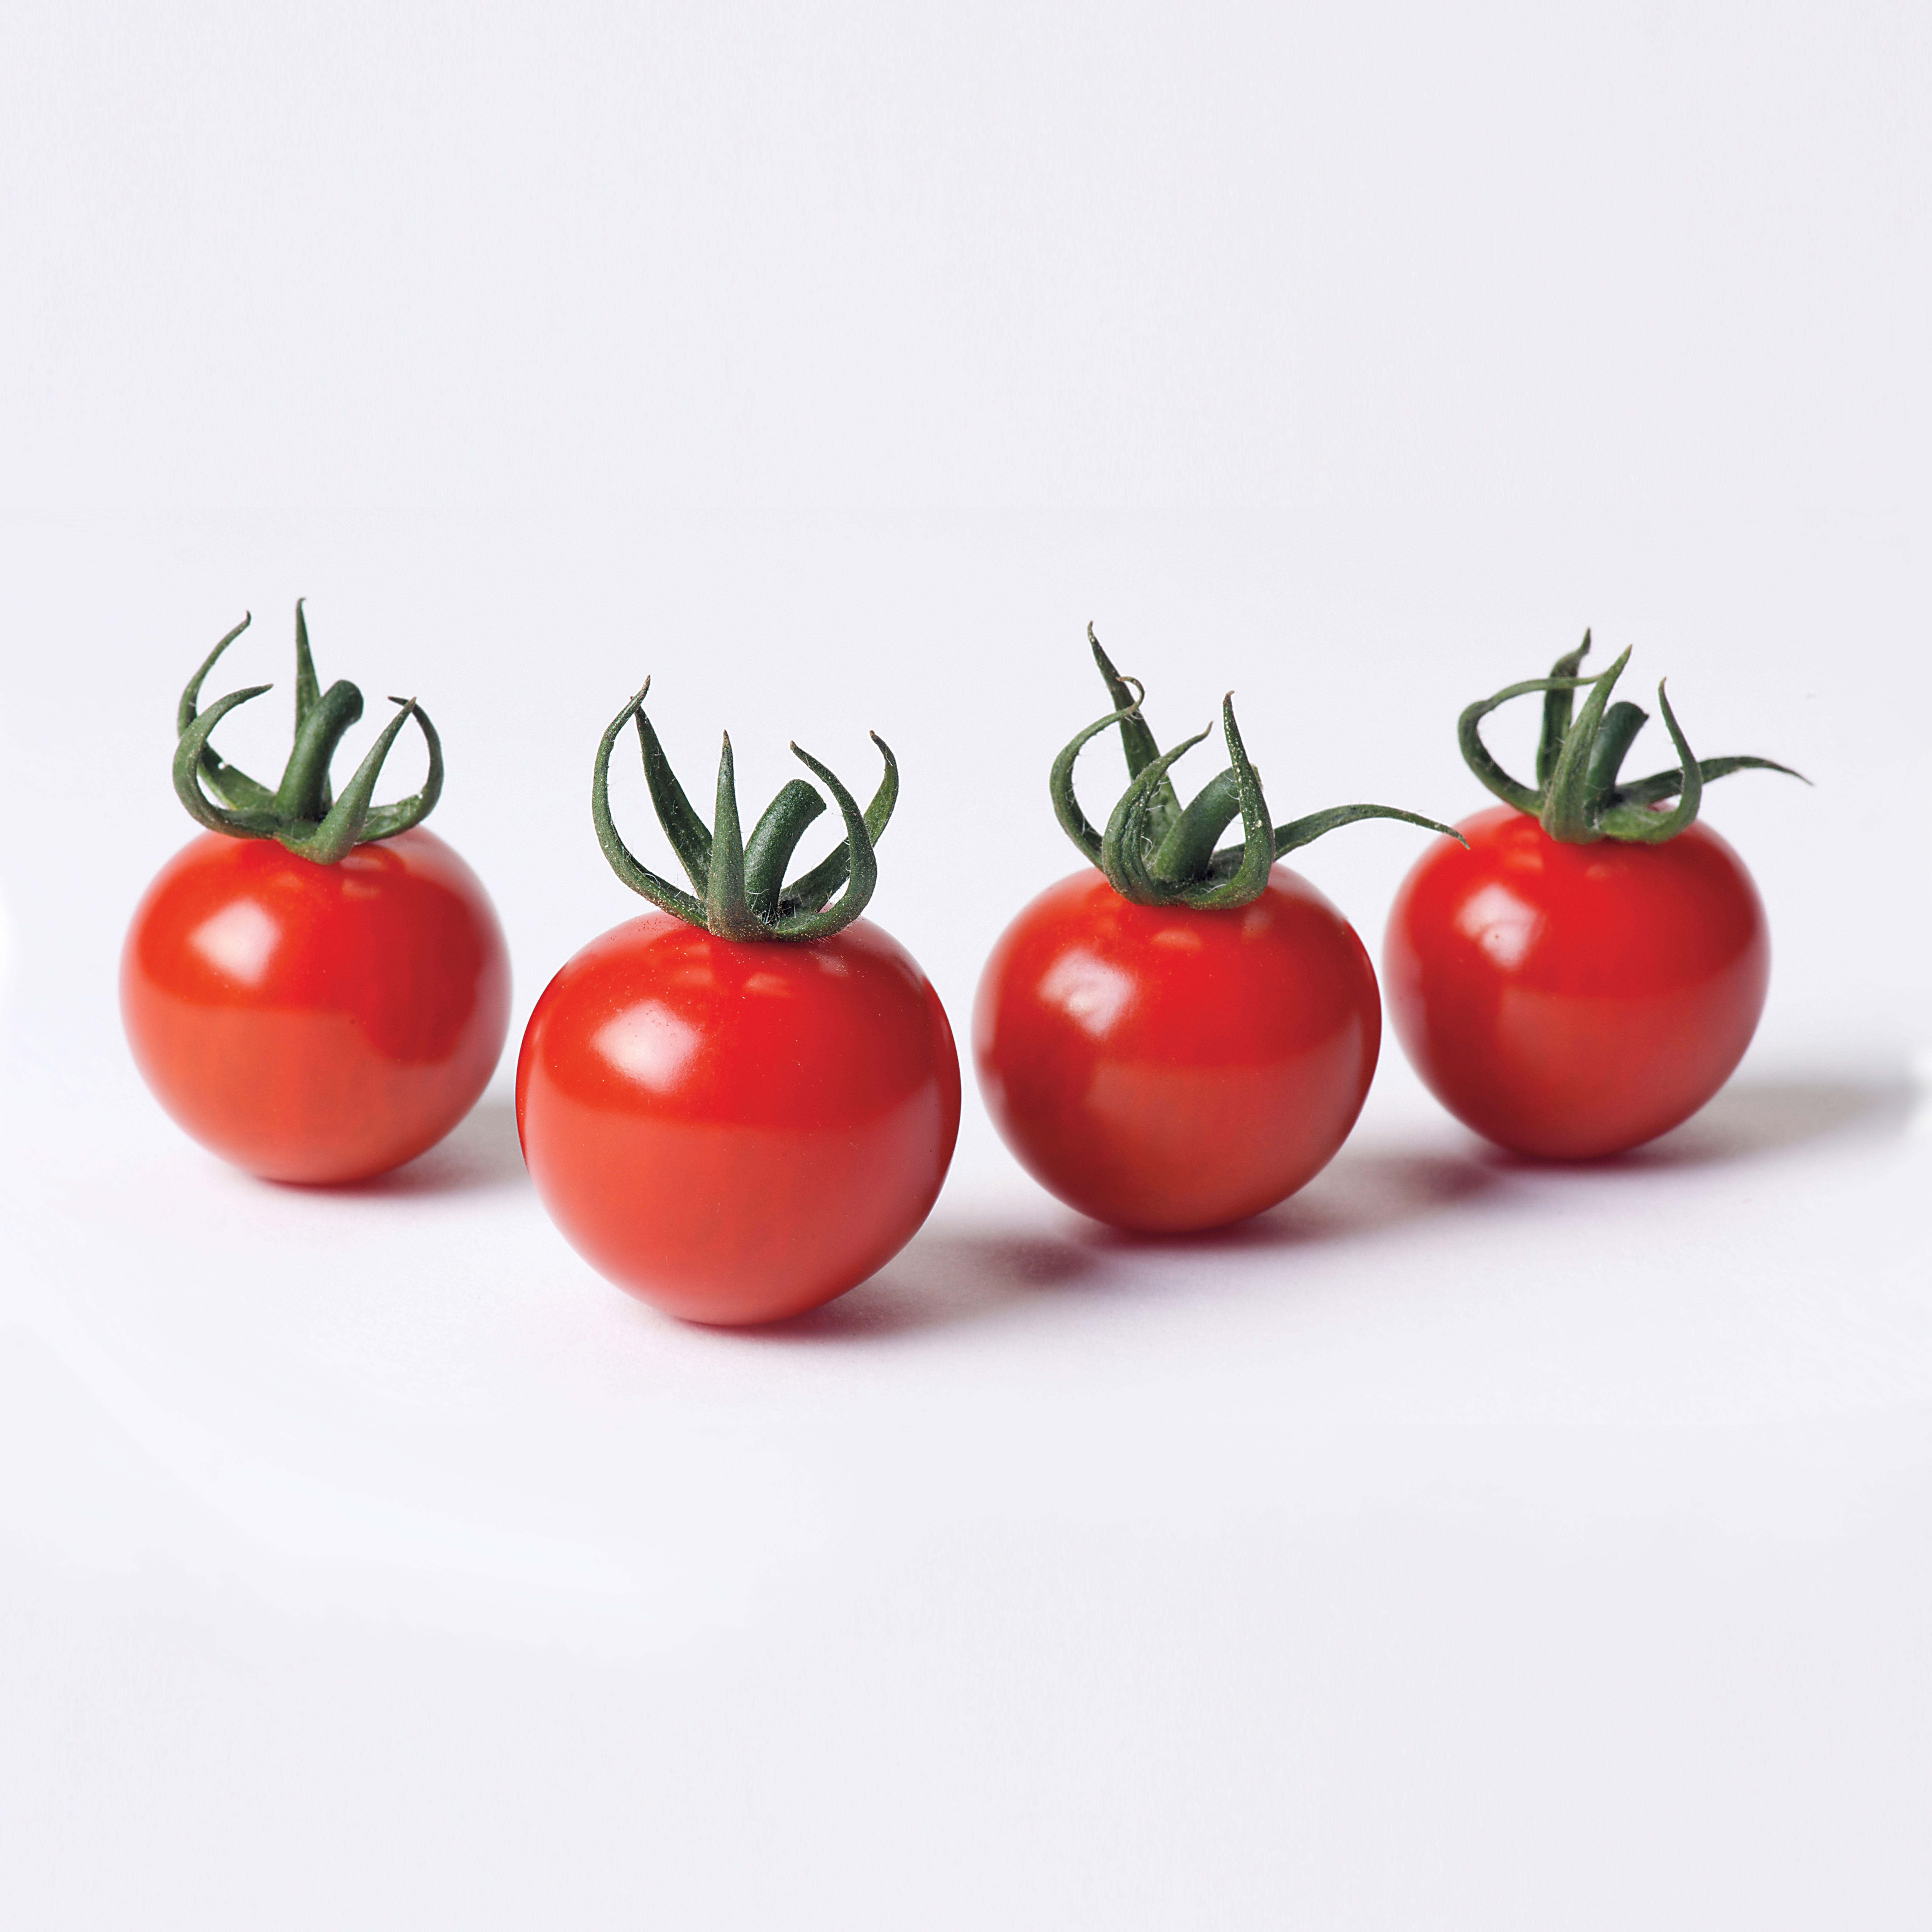 Braveheart Hybrid Cherry Tomato Seeds from Park Seed